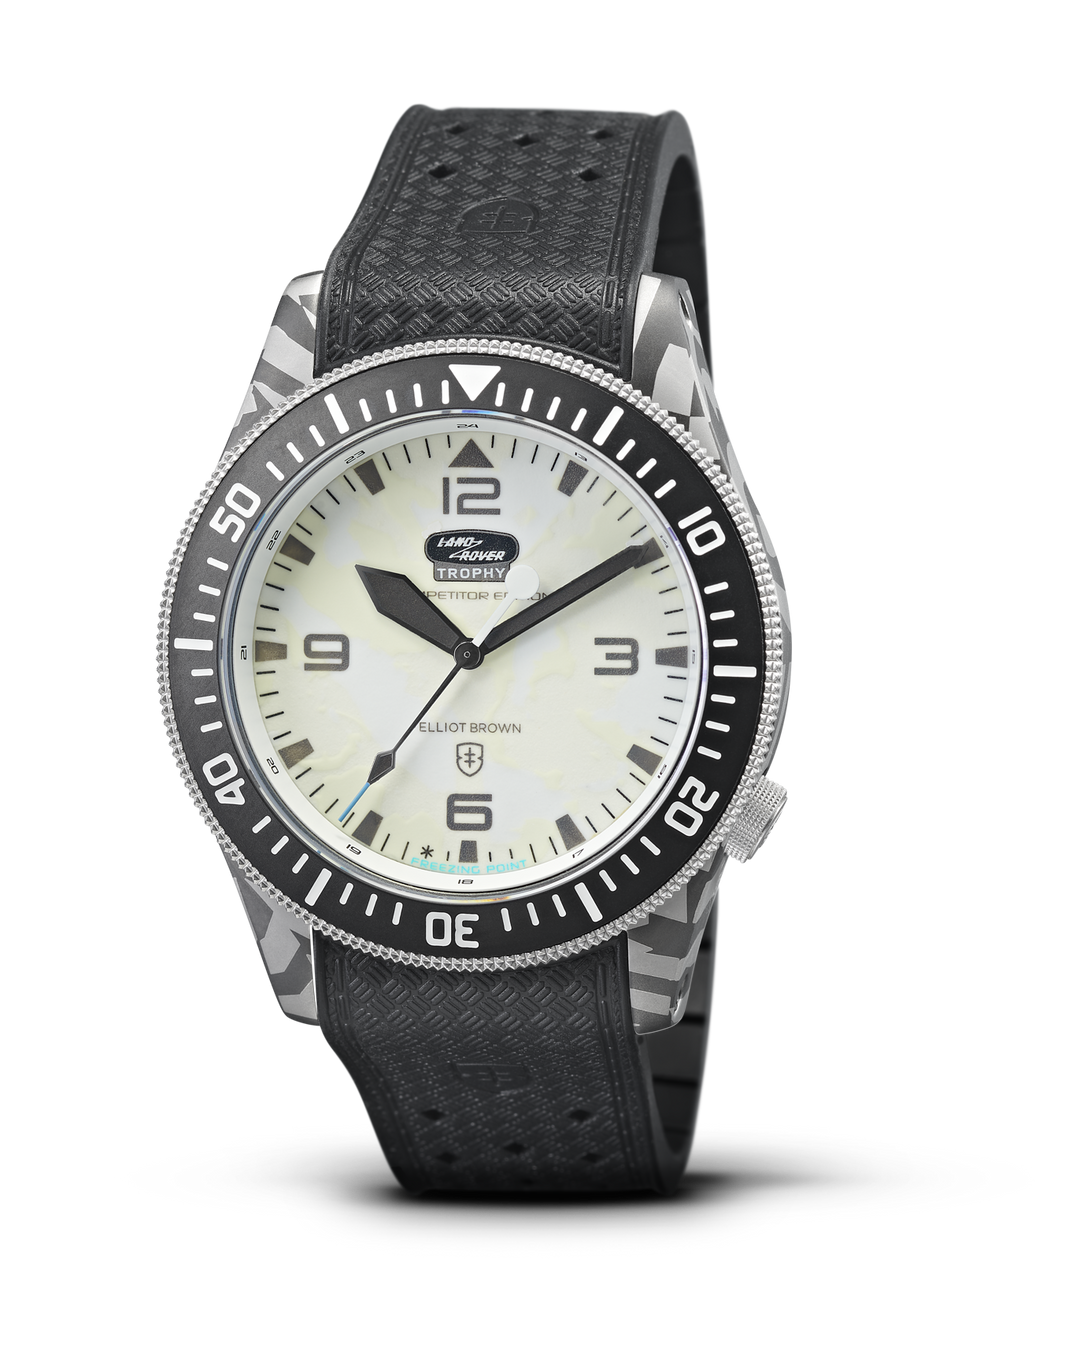 Elliot Brown Land Rover X Trophy 11 Limited edition Watch